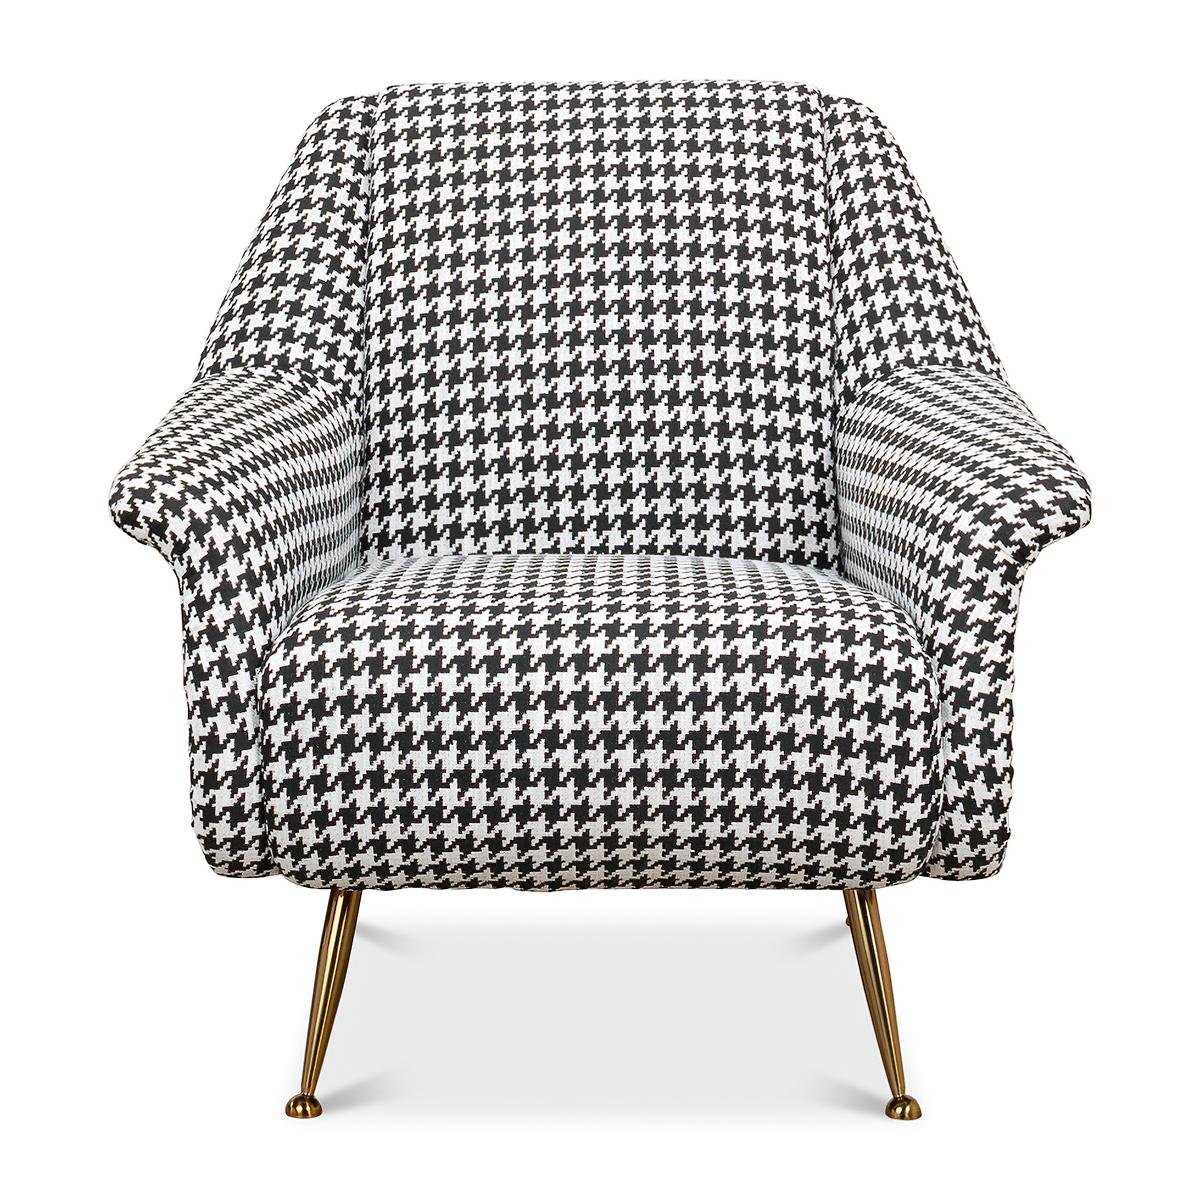 Mid century armchair with houndstooth on linen fabric, tightly upholstered cushion backrest, and seat, raised on gold-toned steel splayed legs.

Dimensions: 33